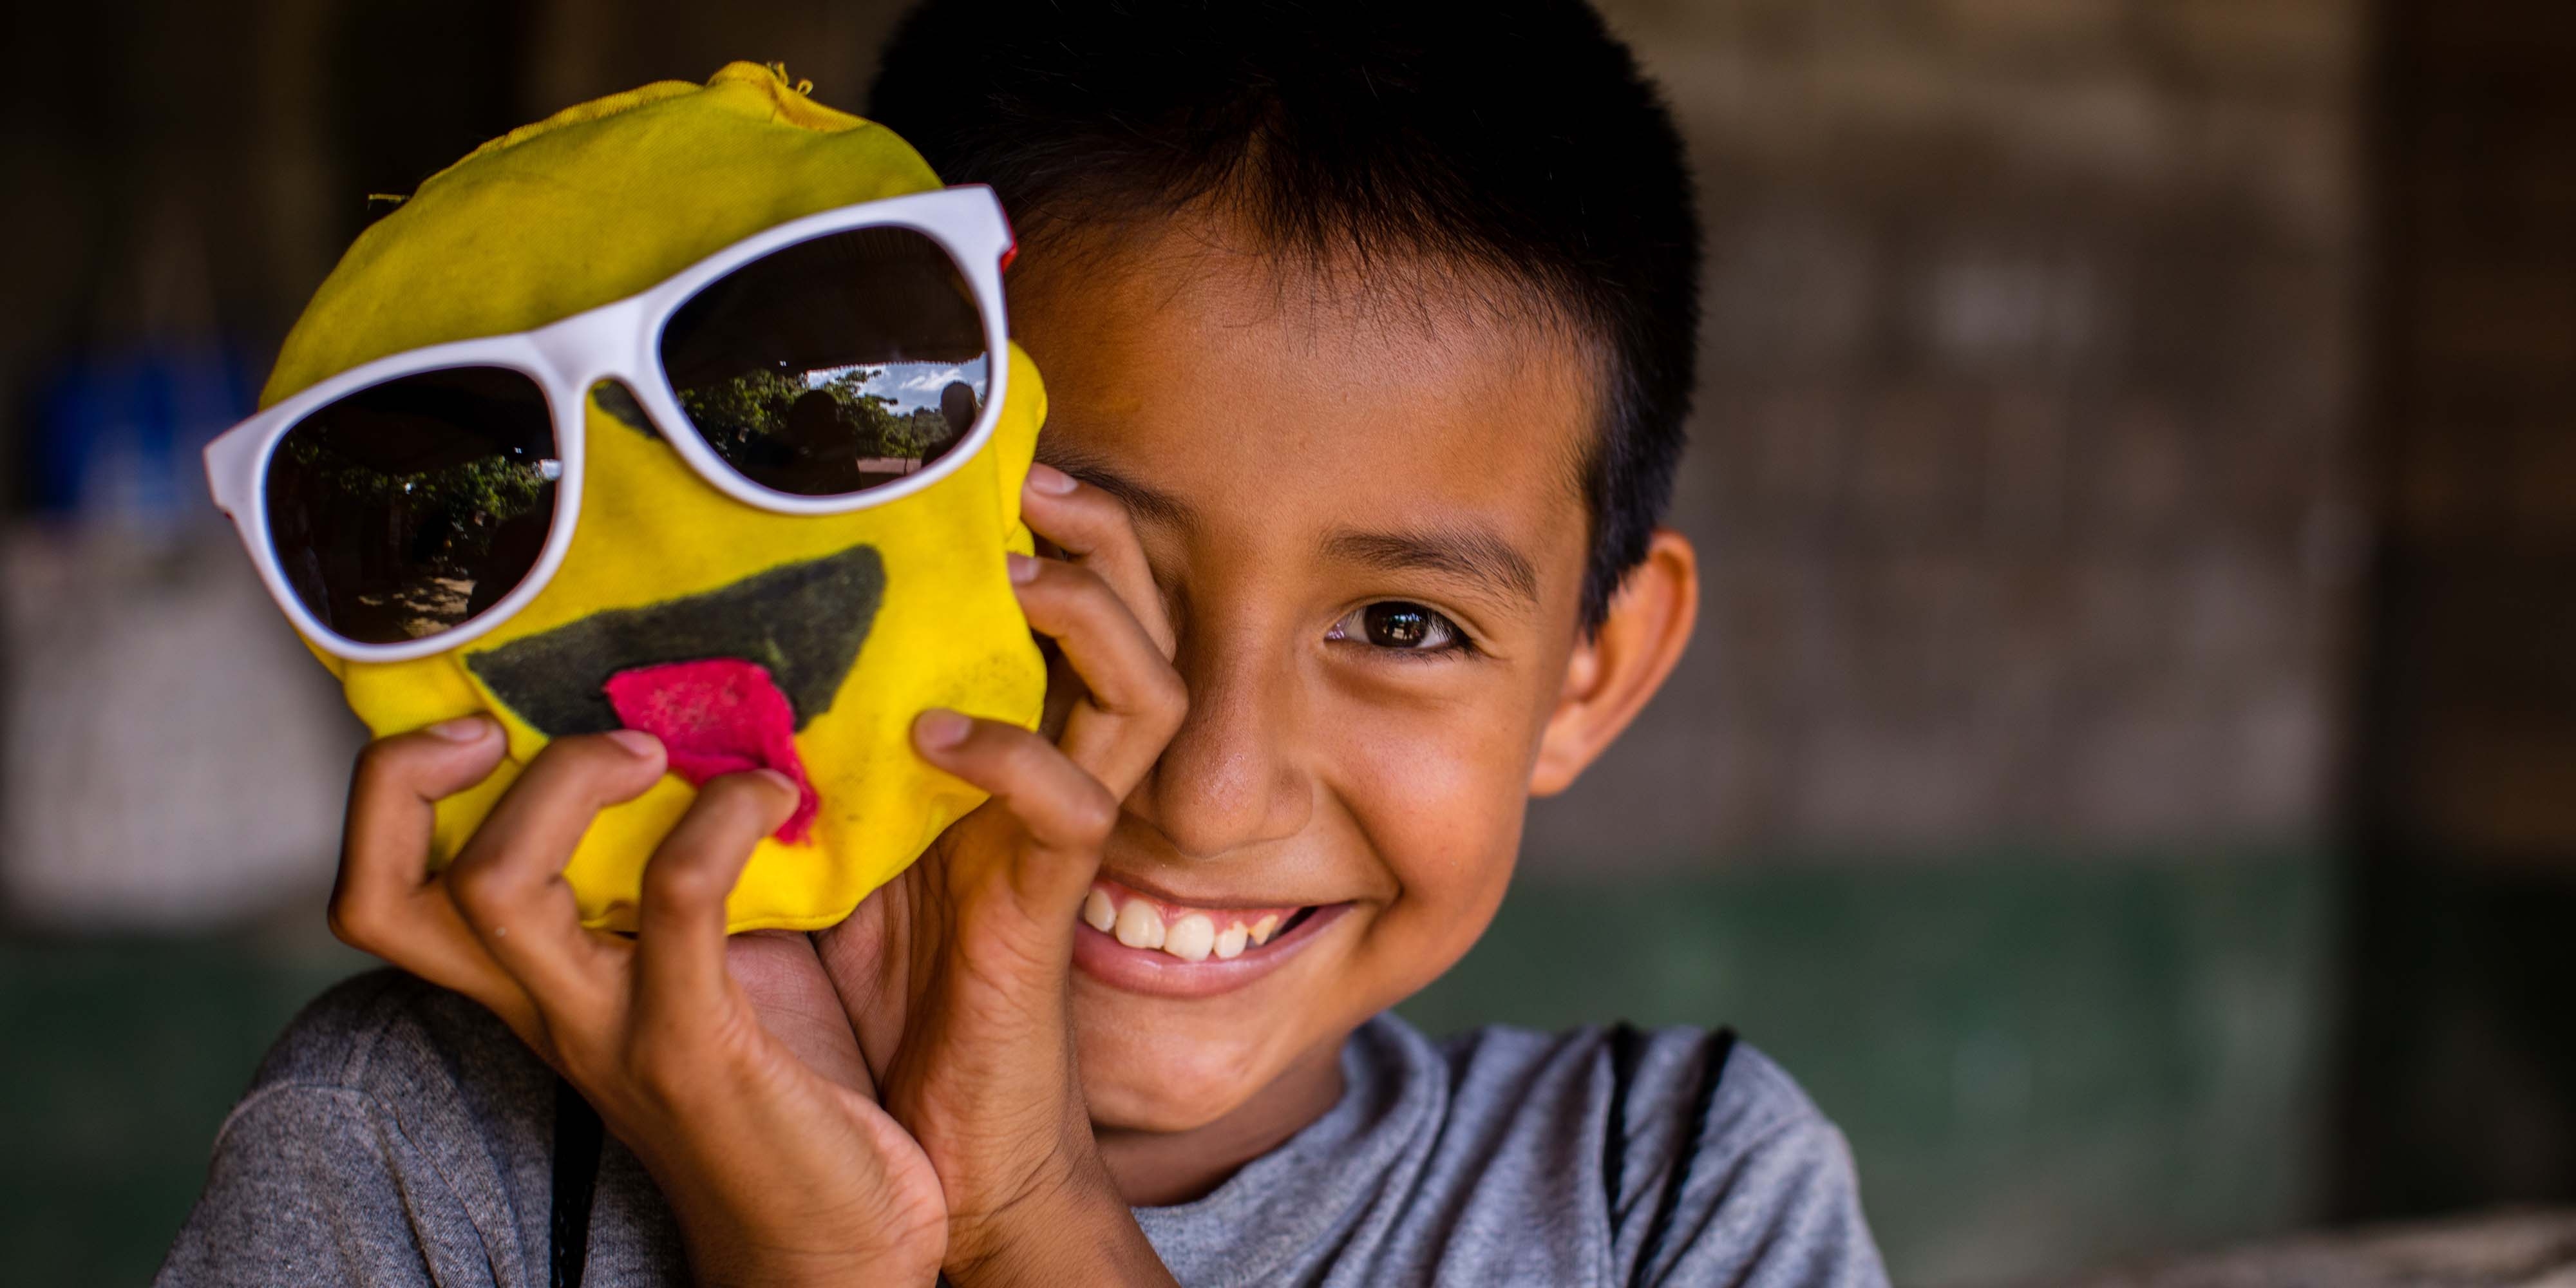 A boy in El Salvador smiles while holding a craft of a yellow smiley face in front of him.